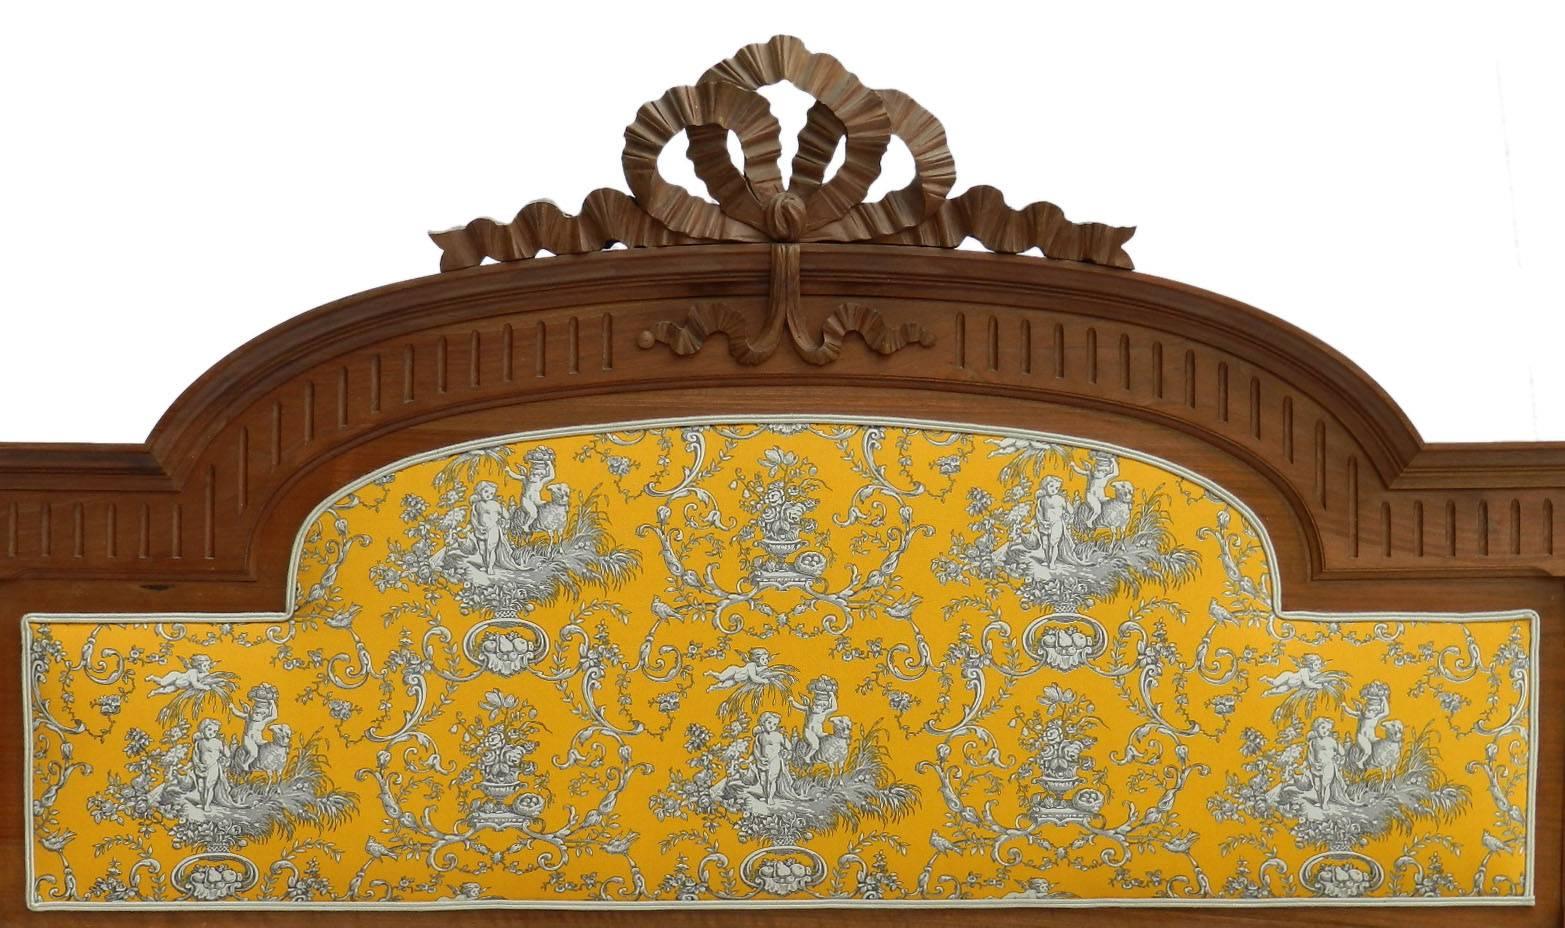 Impressive French chateau bed with Baroque upholstered putti cherub panels US Queen UK king, size can be recovered before shipping
19th century Louis XVI revival
The panels have been reupholstered with new 'old gold' mustard cotton easily changed